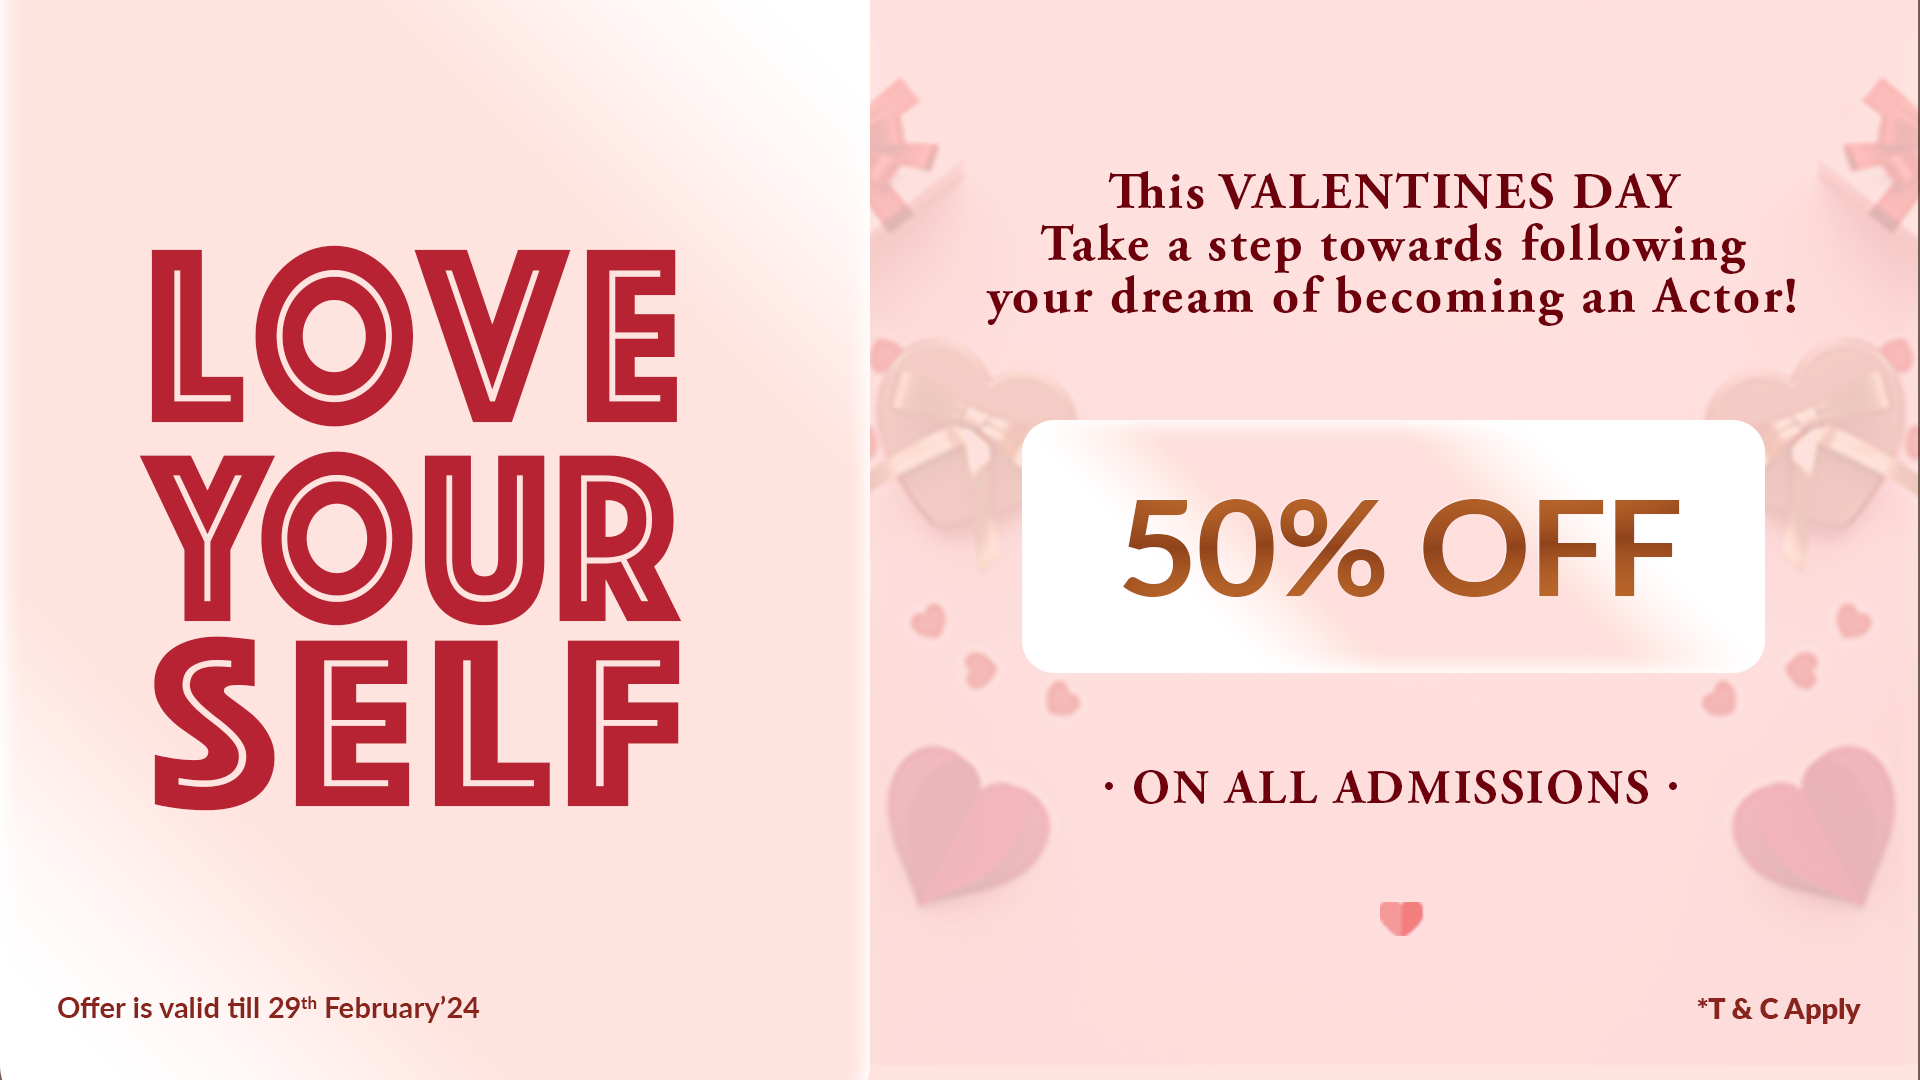 VALENTINES DAY SPECIAL OFFER